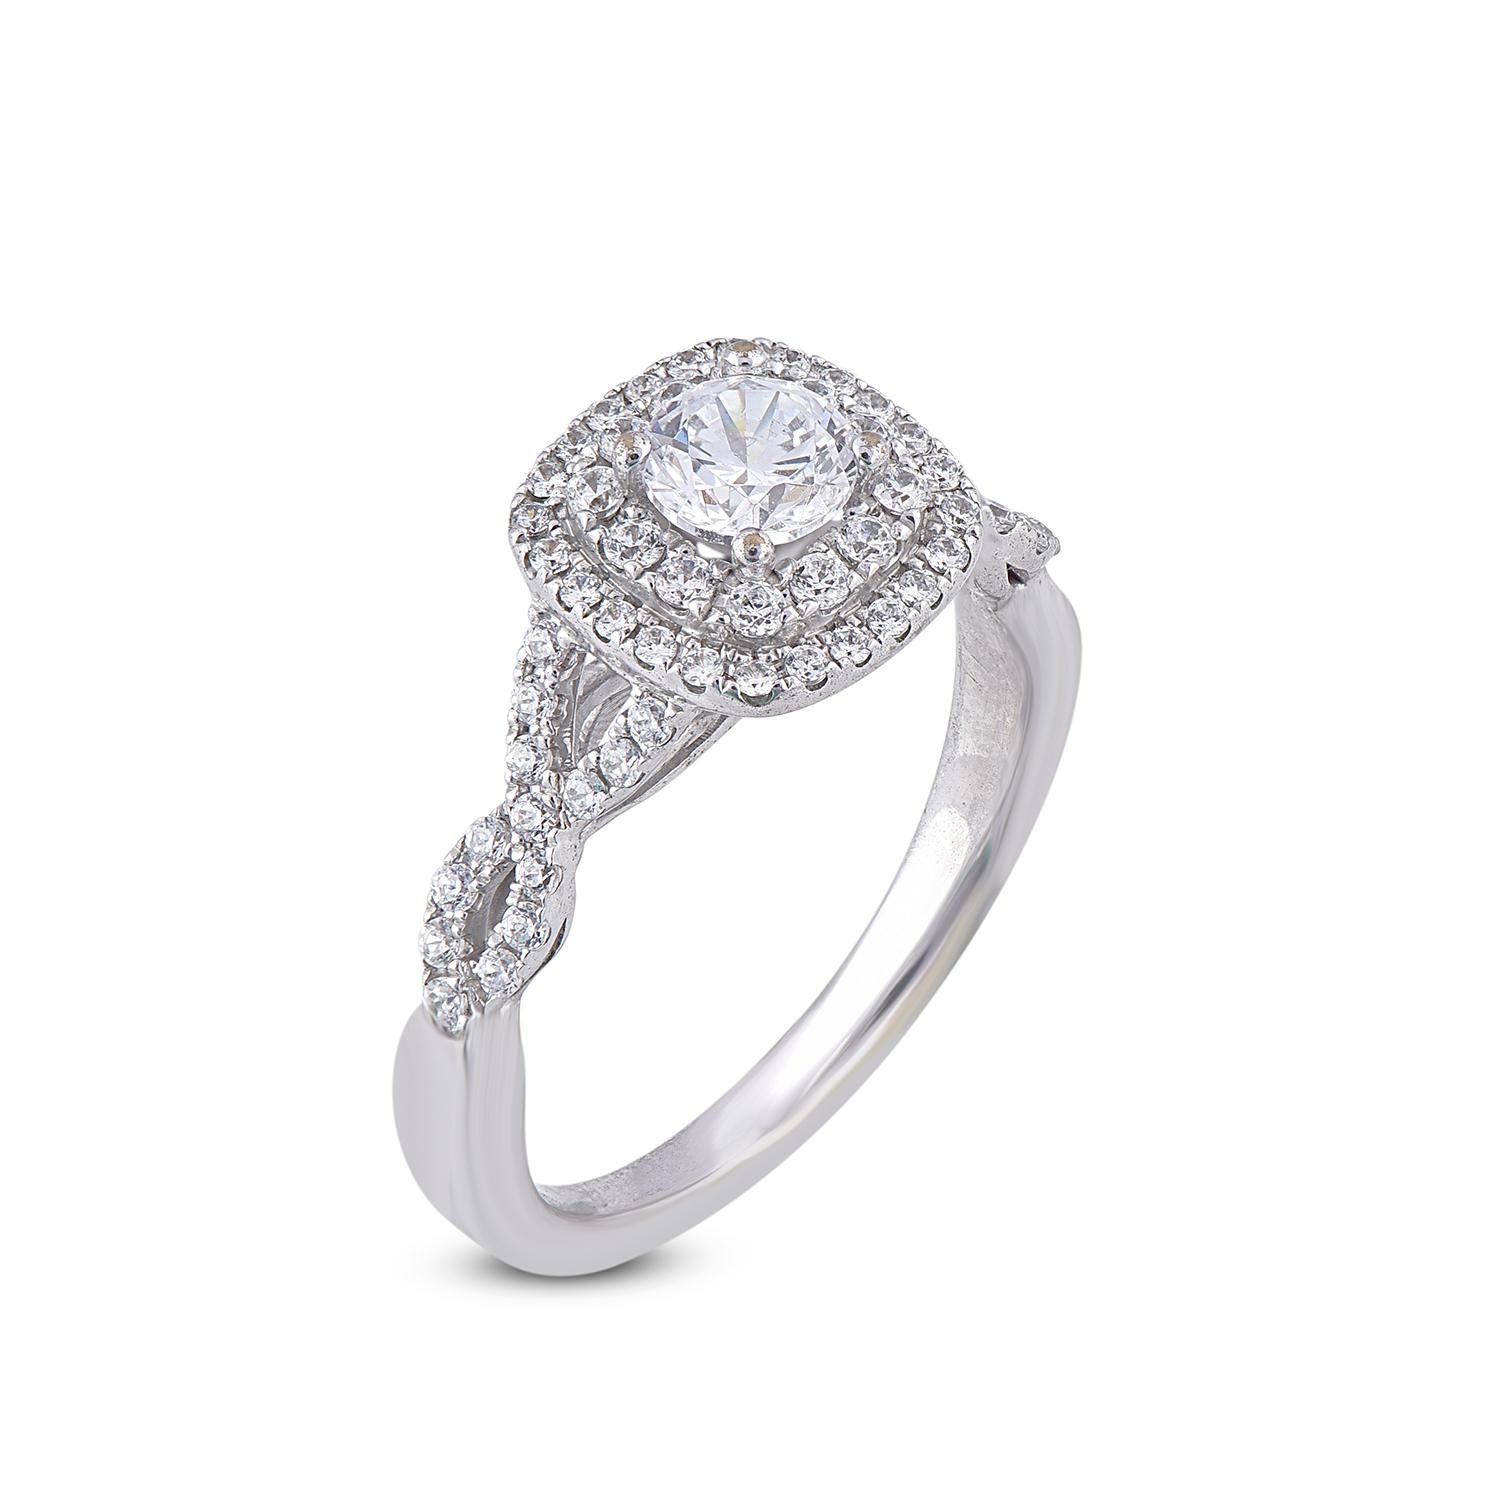 This immaculate double halo engagement ring combines sparkling style with delicate femininity from the twisted split shank. The twists give the ring a ribbon-like effect that is ladylike and reminiscent of a bow this ring is expertly crafted in 18